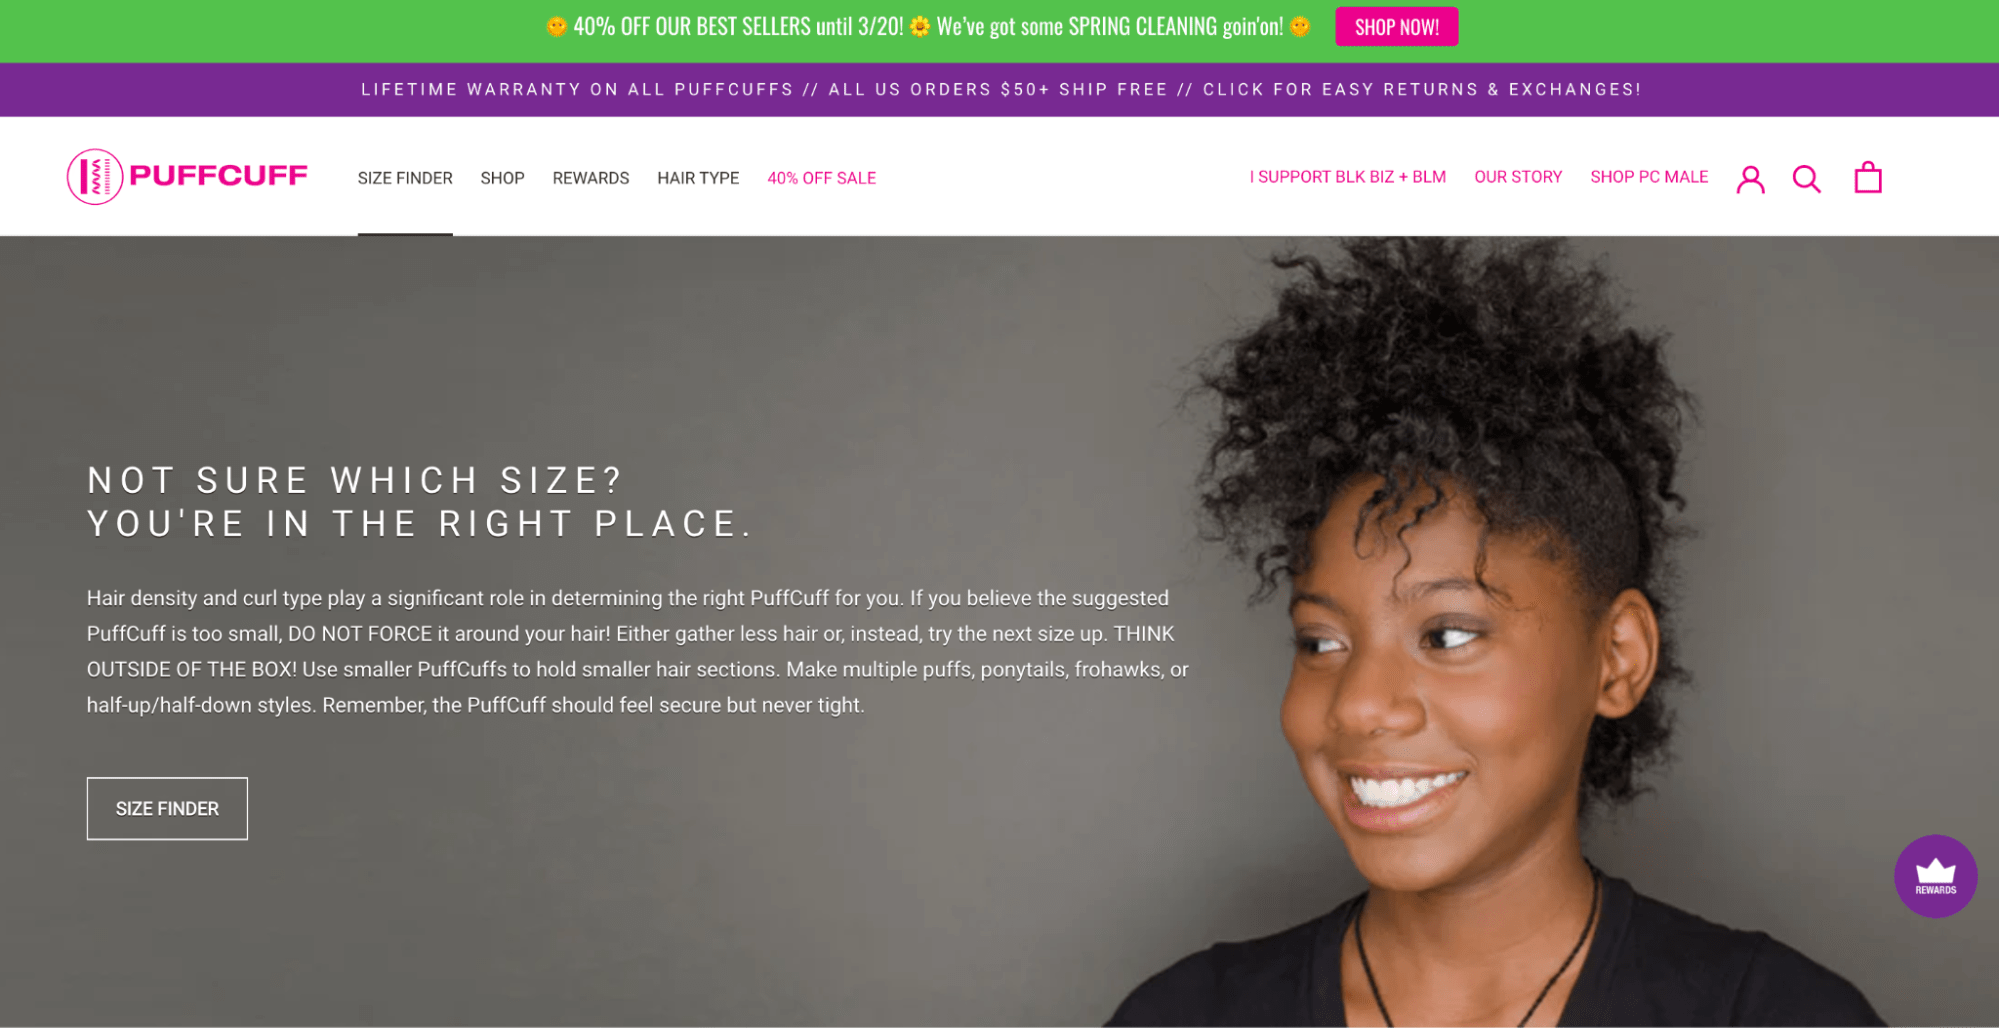 PuffCuff 2 women-owned businesses